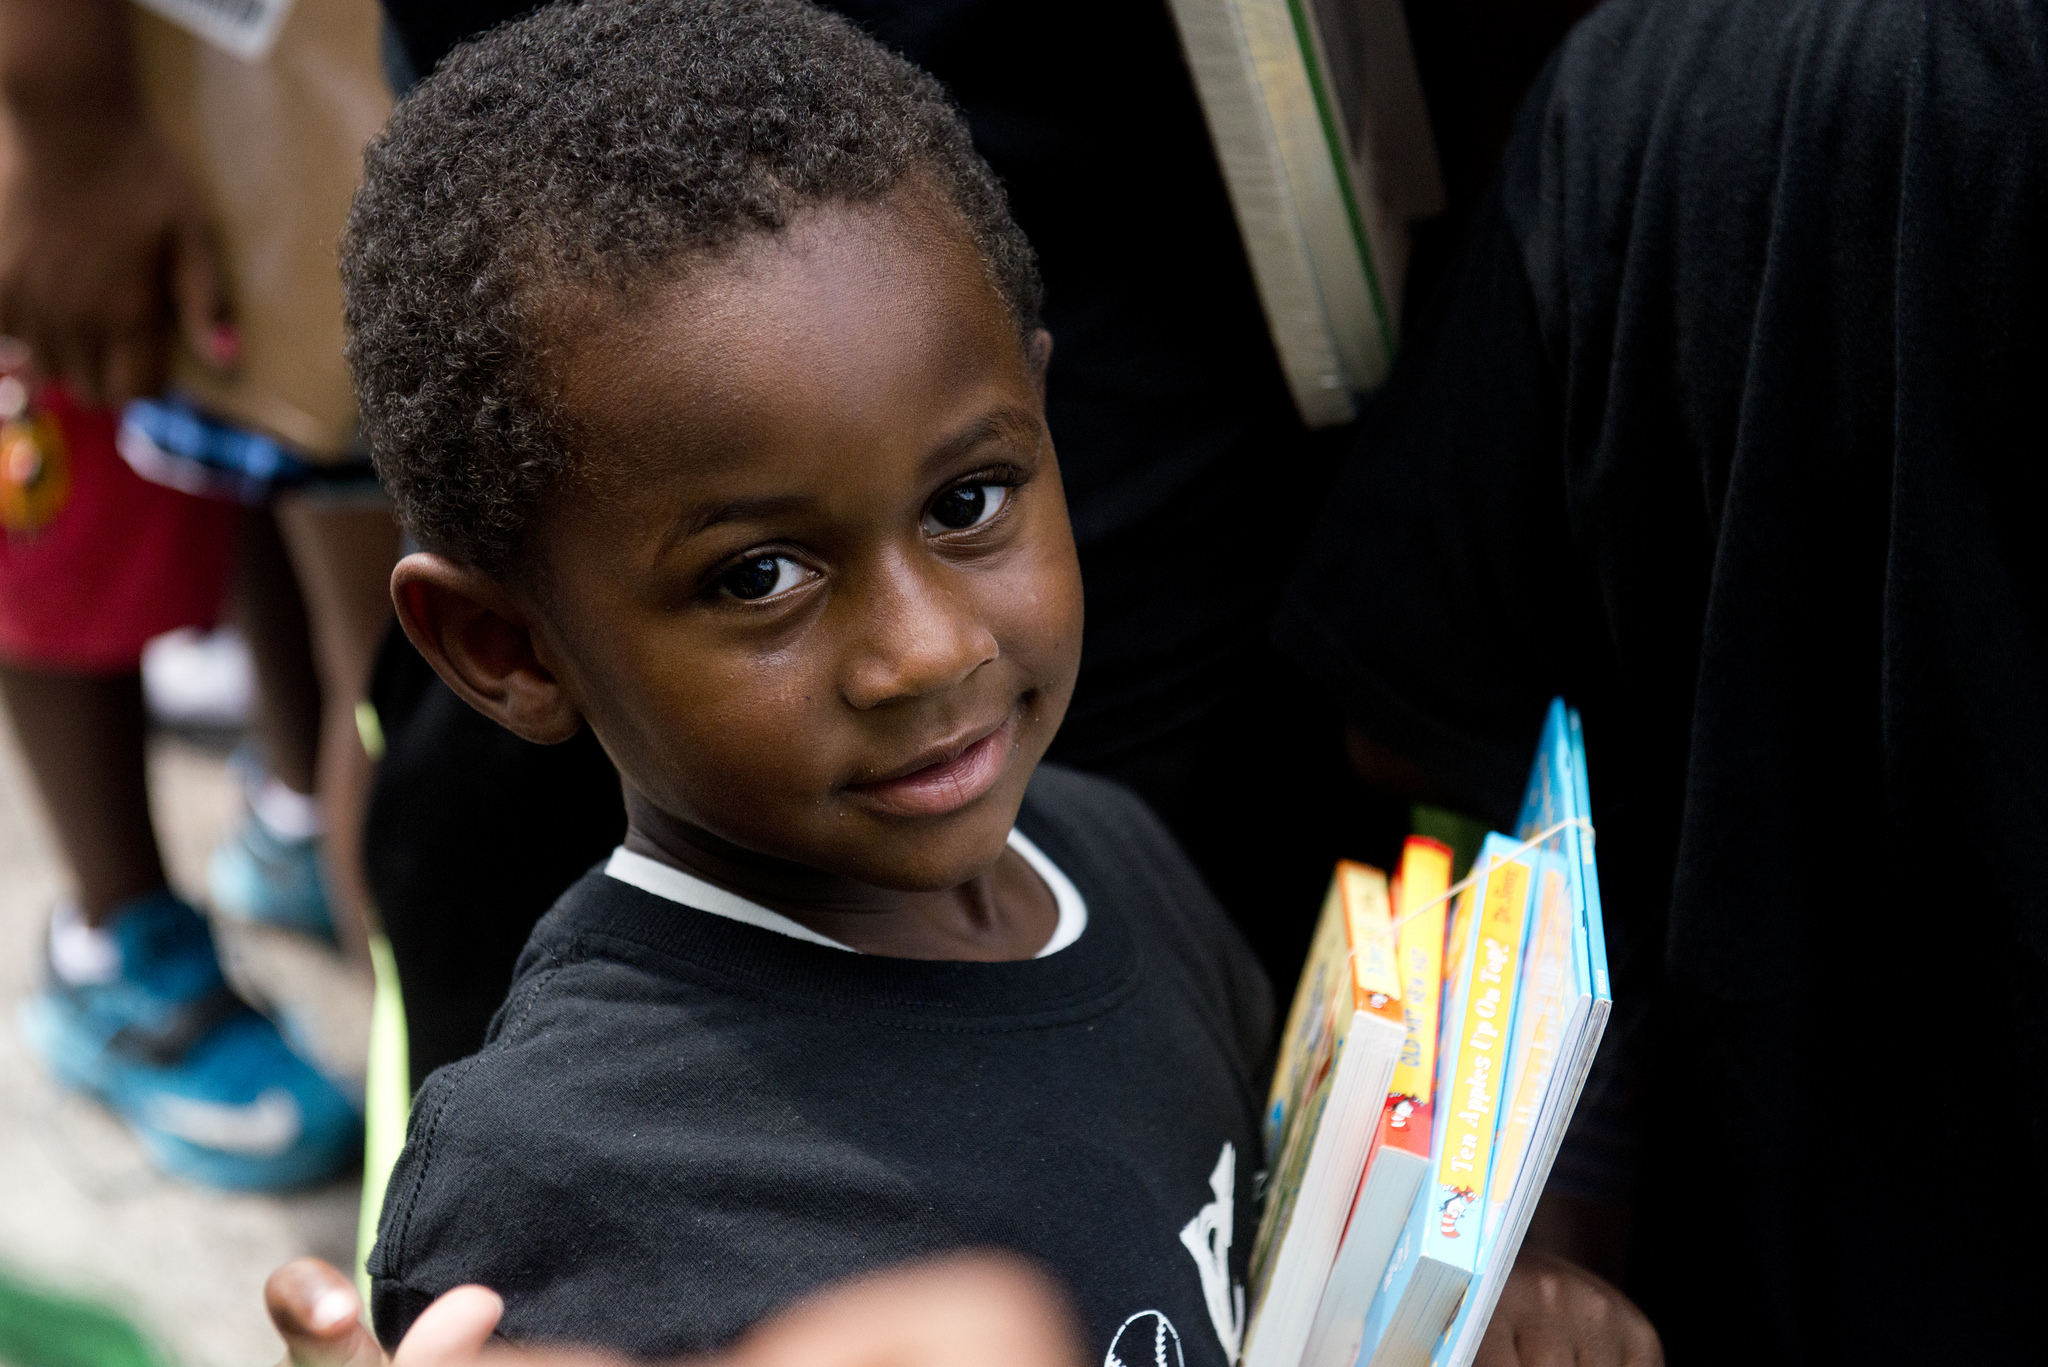 Kids and their foster grandparents are filling summer reading gaps with The Playstreet Book Club